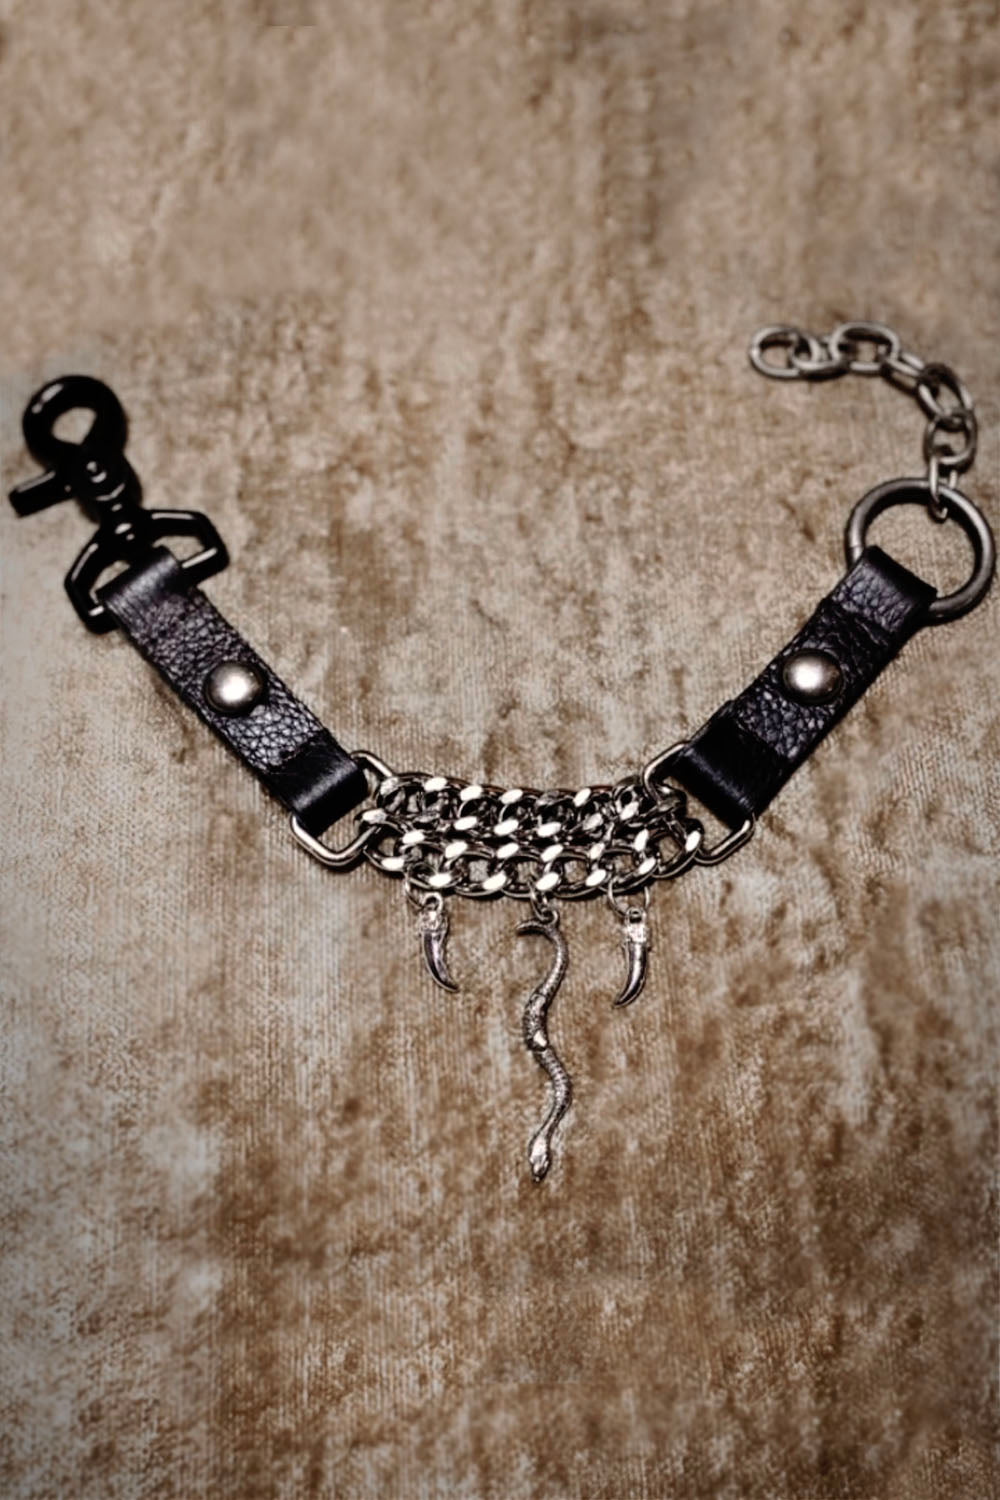 Handcrafted Leather and Chain Snake Charmer Choker